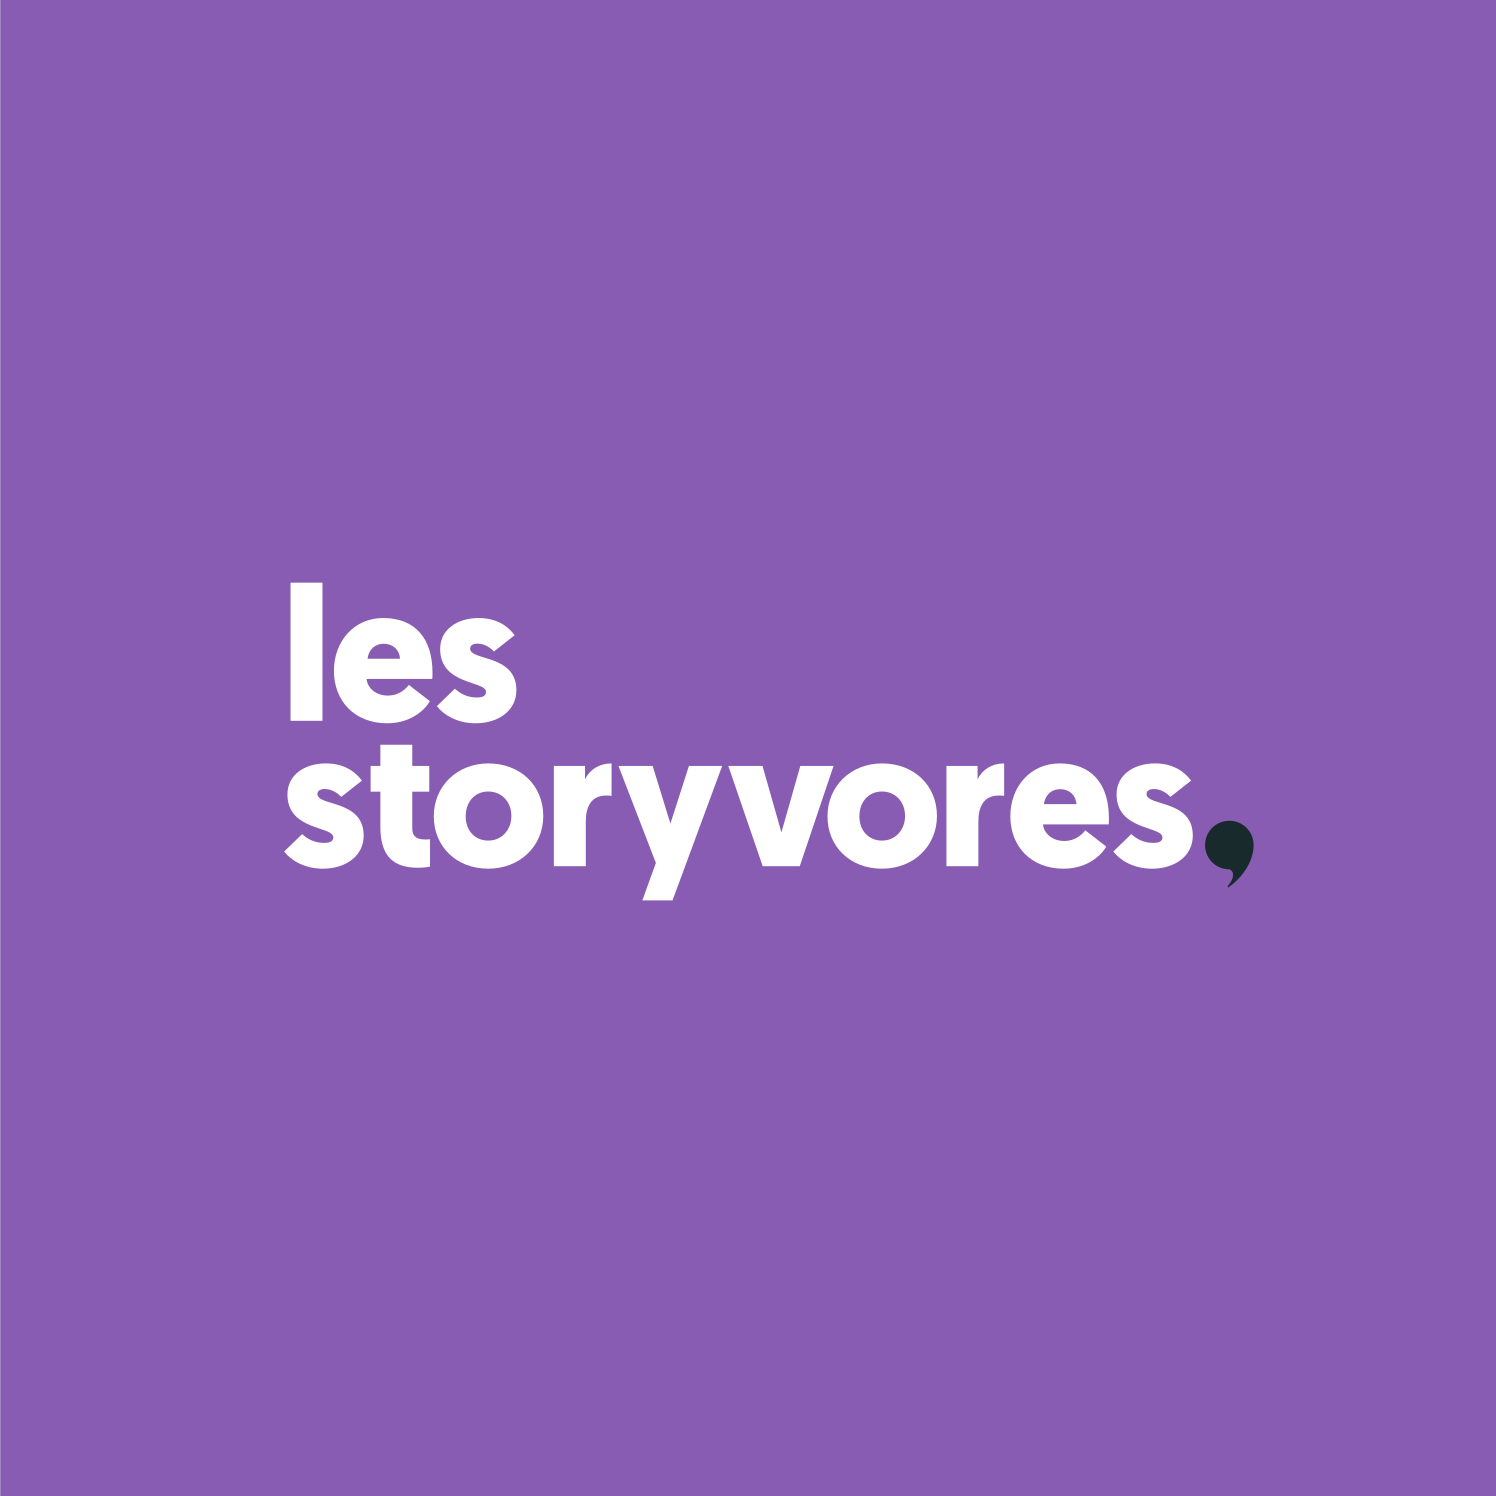 les storyvores